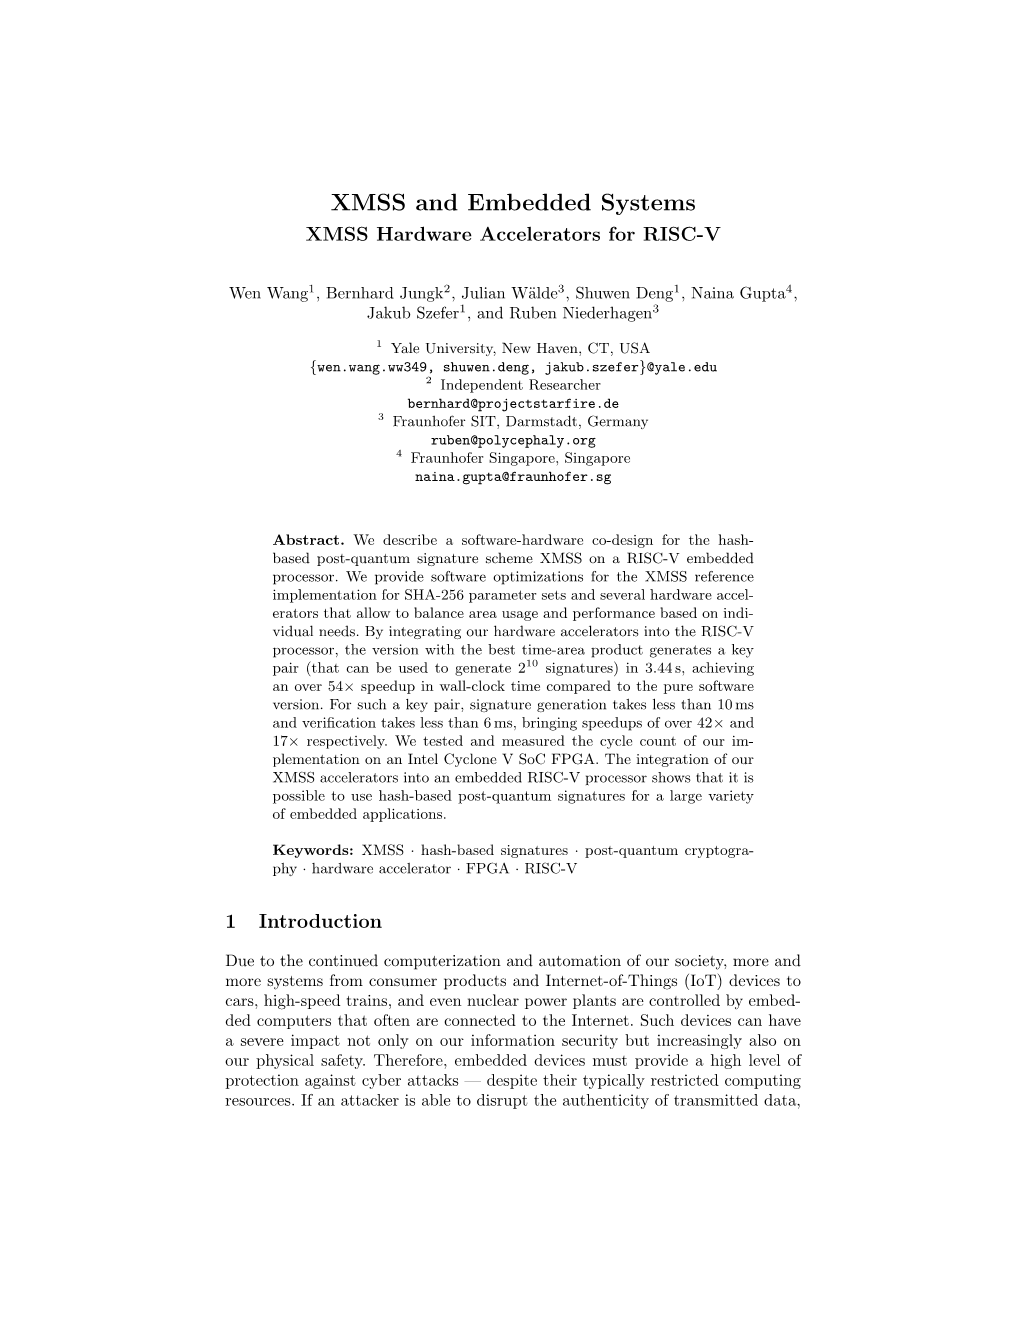 XMSS and Embedded Systems XMSS Hardware Accelerators for RISC-V